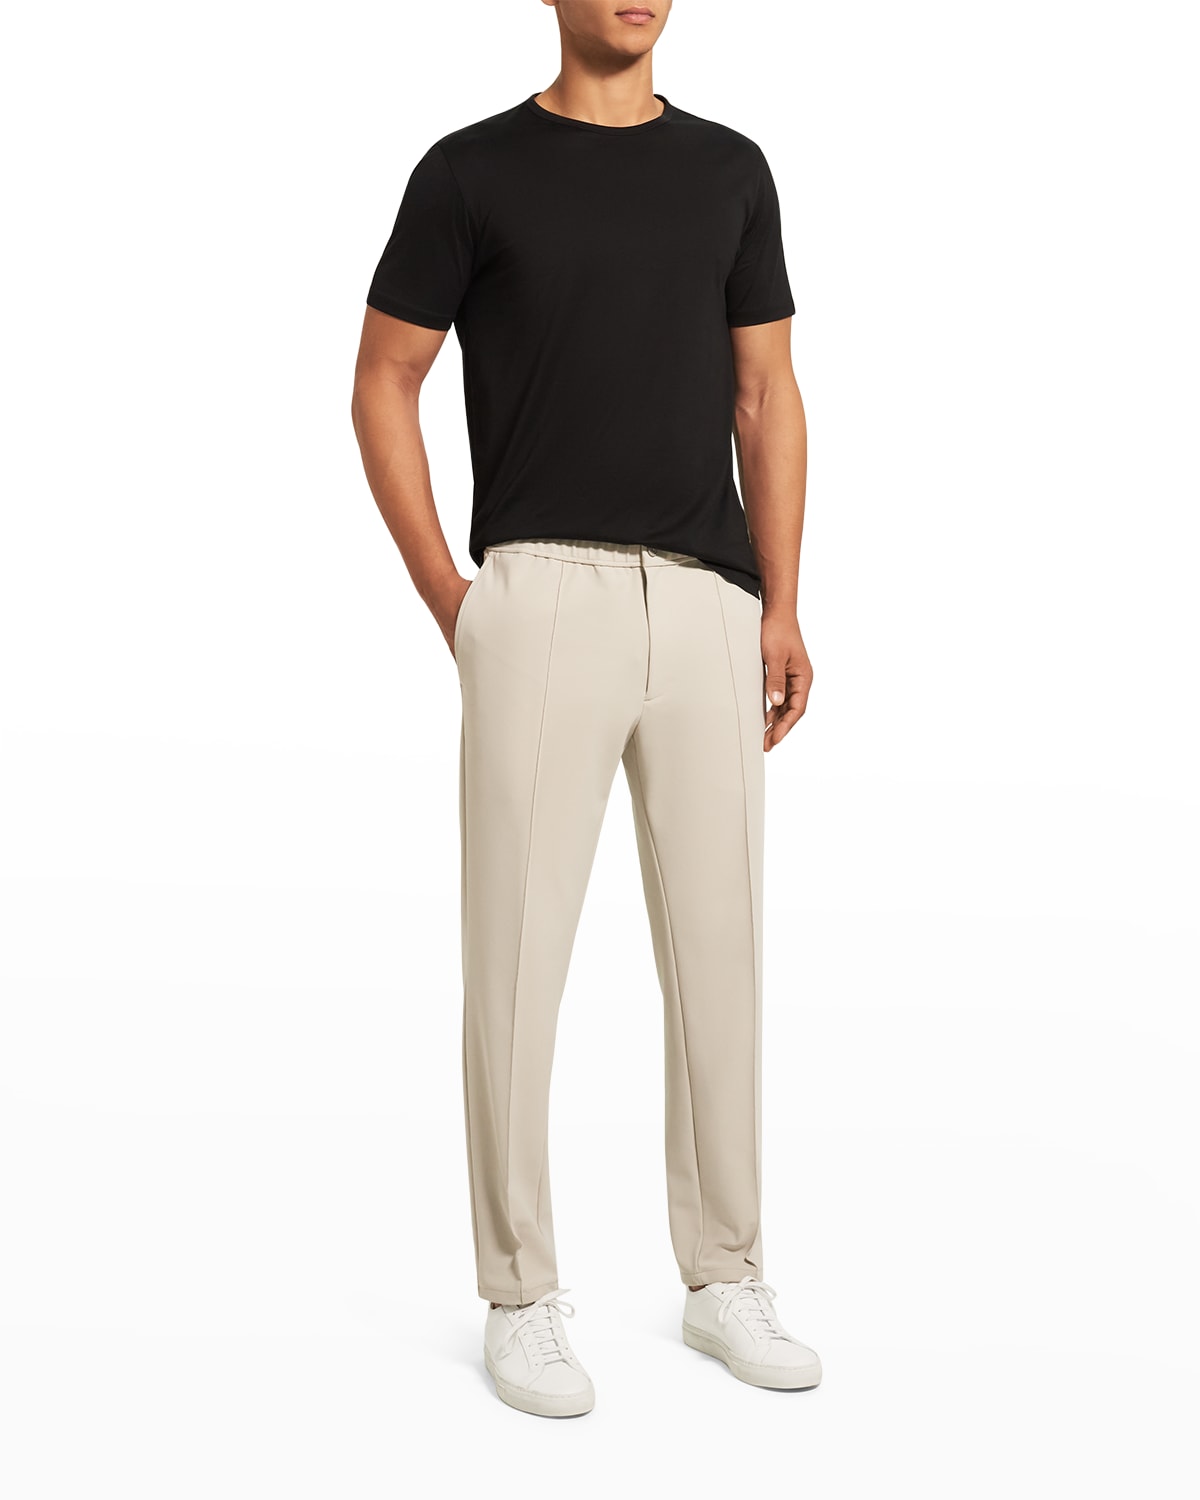 Imported Theory Pants | Neiman Marcus